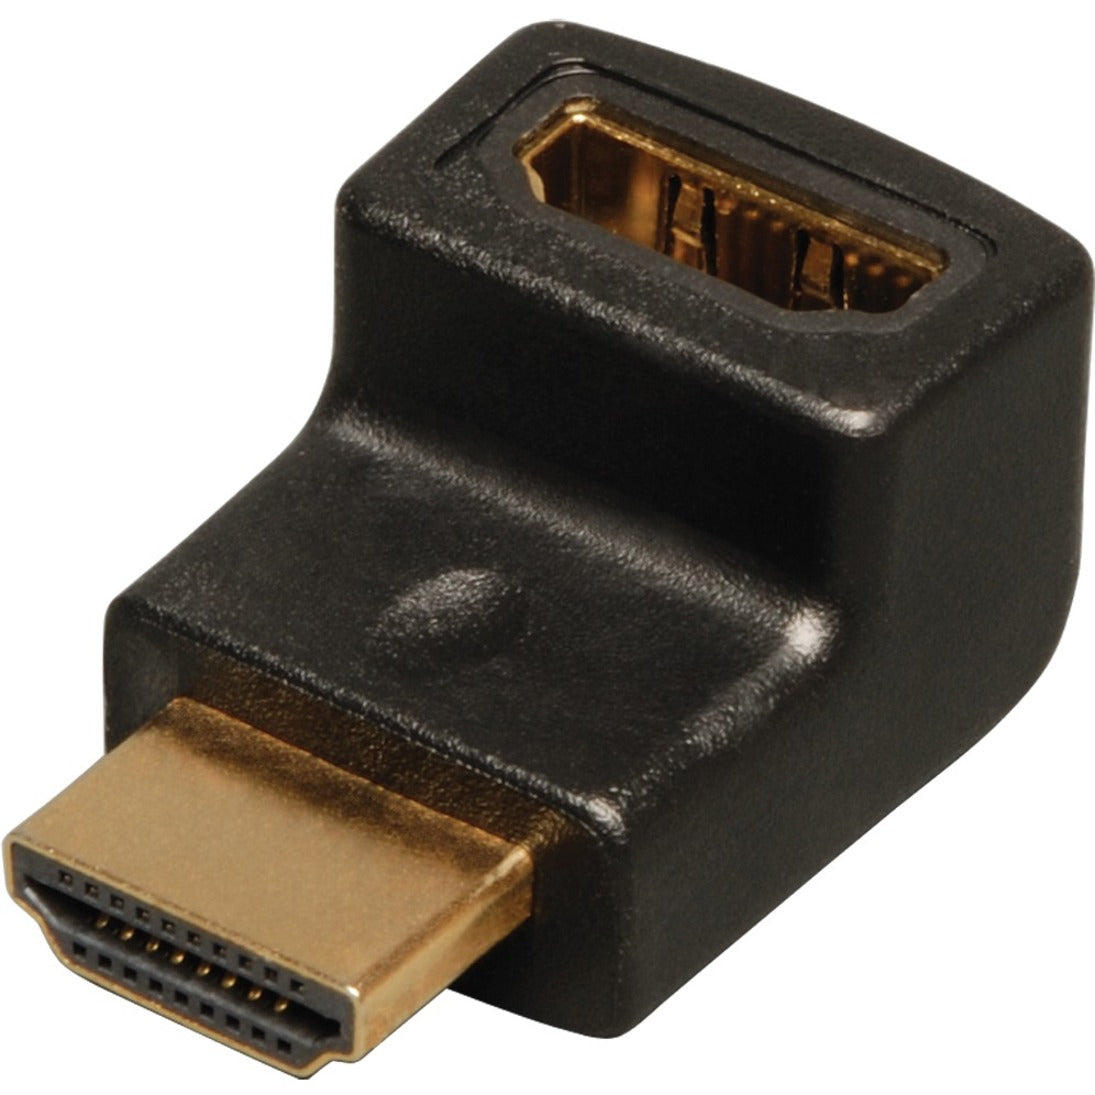 Tripp Lite P142-000-UP HDMI Adapter, Right-Angled Connector, Gold-Plated, Black